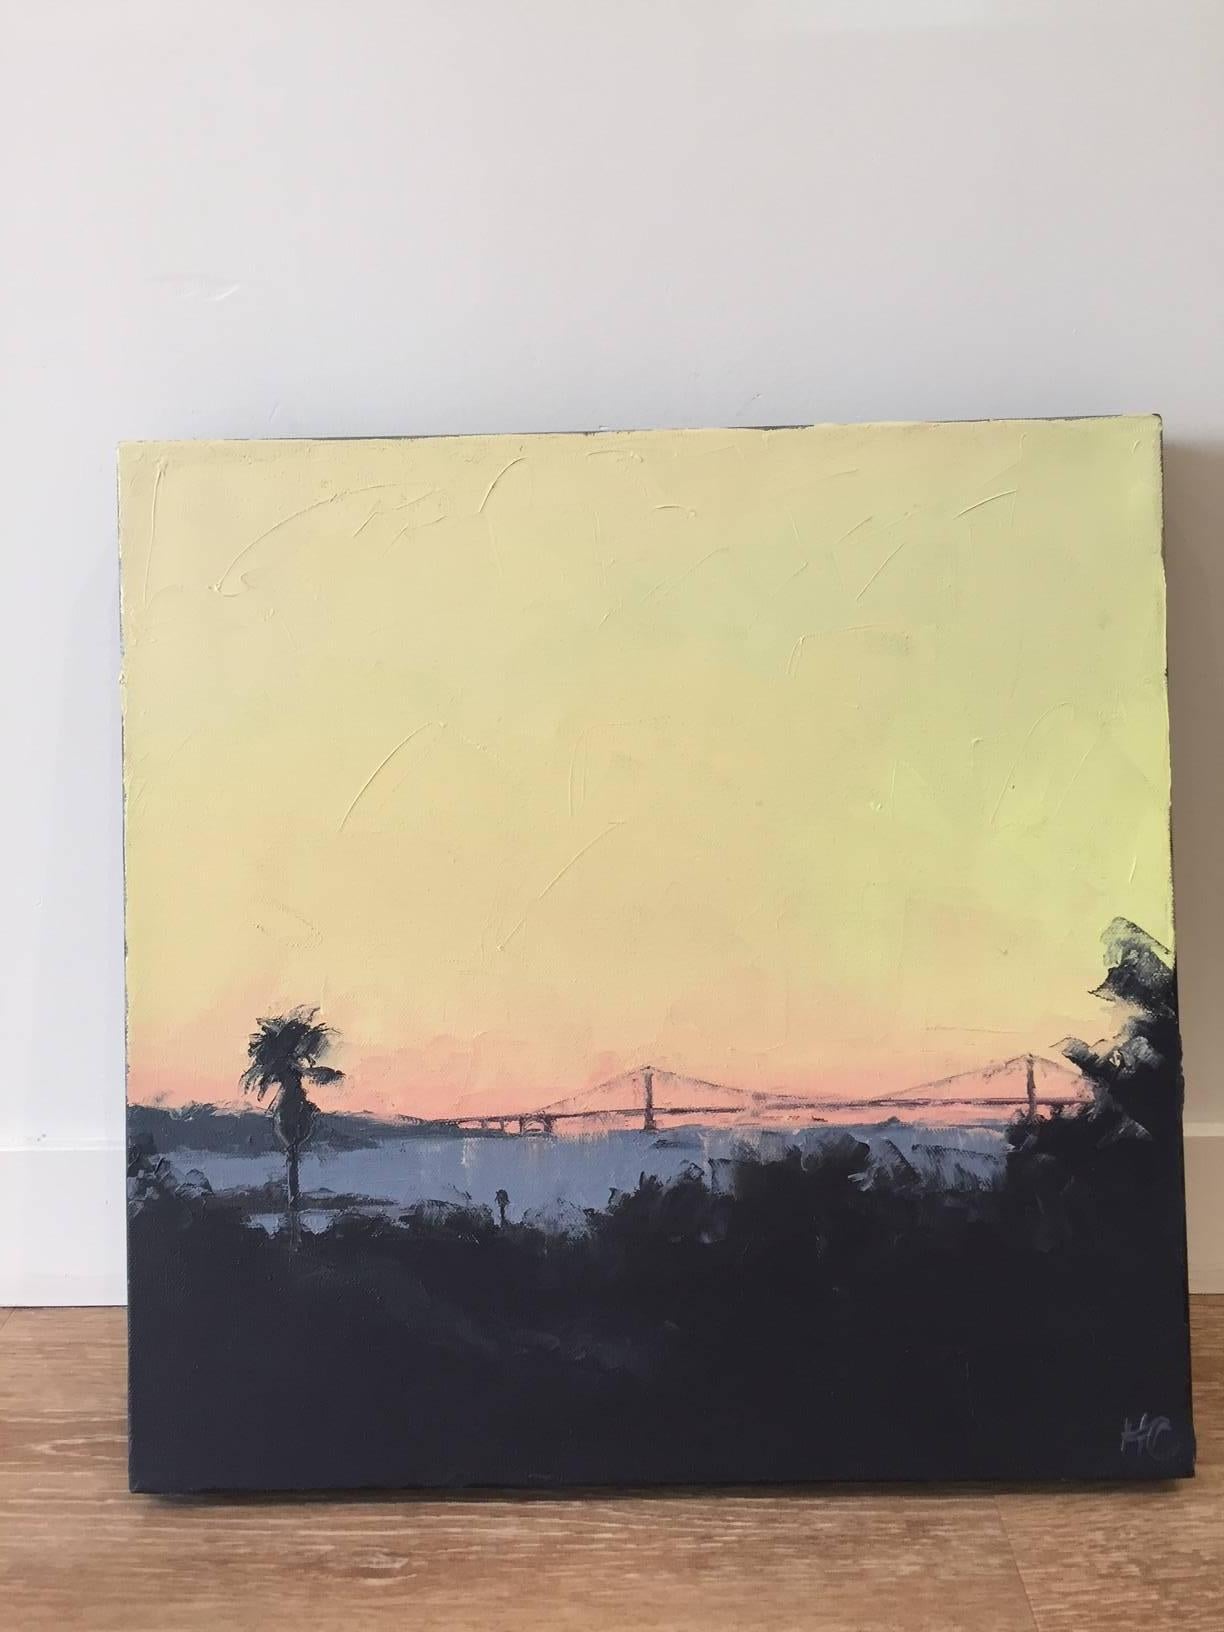 Golden Gate with Palm, with its yellow sky, Golden Gate Bridge and black urban skyline, from Heather Capen, whose oil paintings reflect her interest in the built environment, and the interplay between city life, nature and infrastructure. Responding